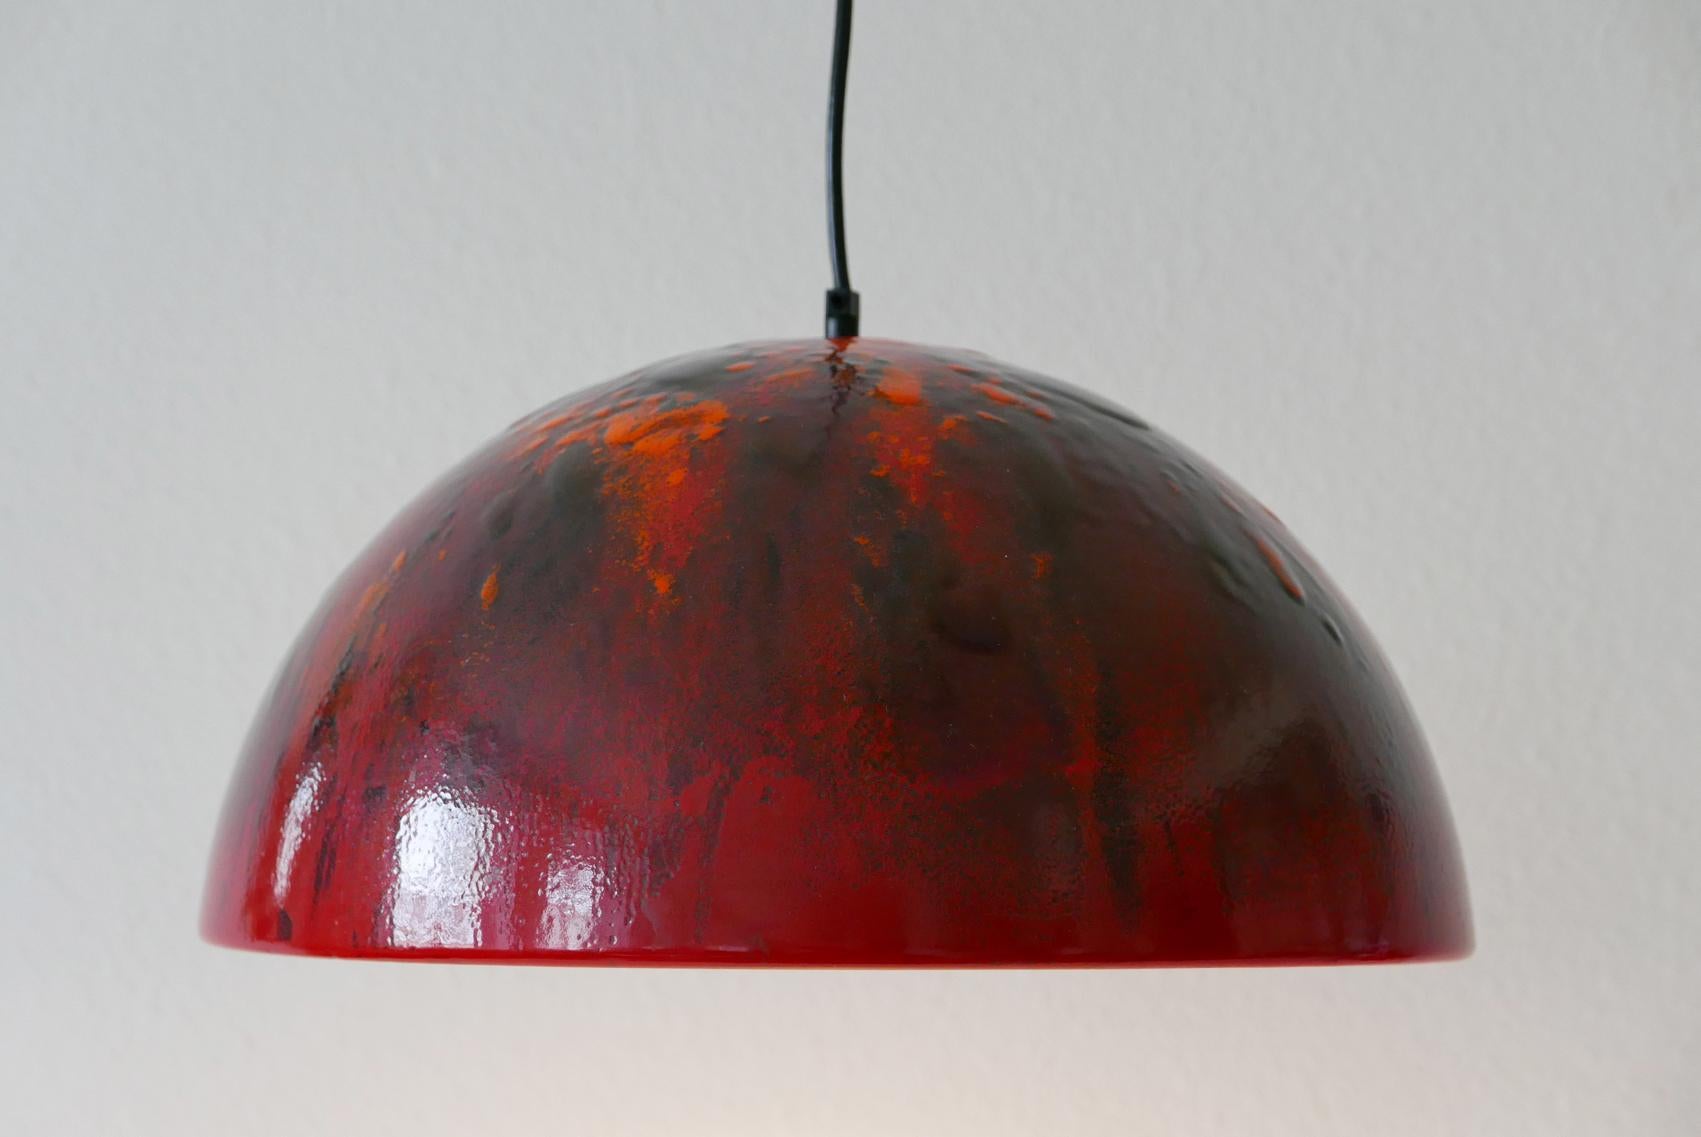 Large and Elegant Mid-Century Modern Enameled Pendant Lamp Dome, 1960s, Denmark In Good Condition For Sale In Munich, DE